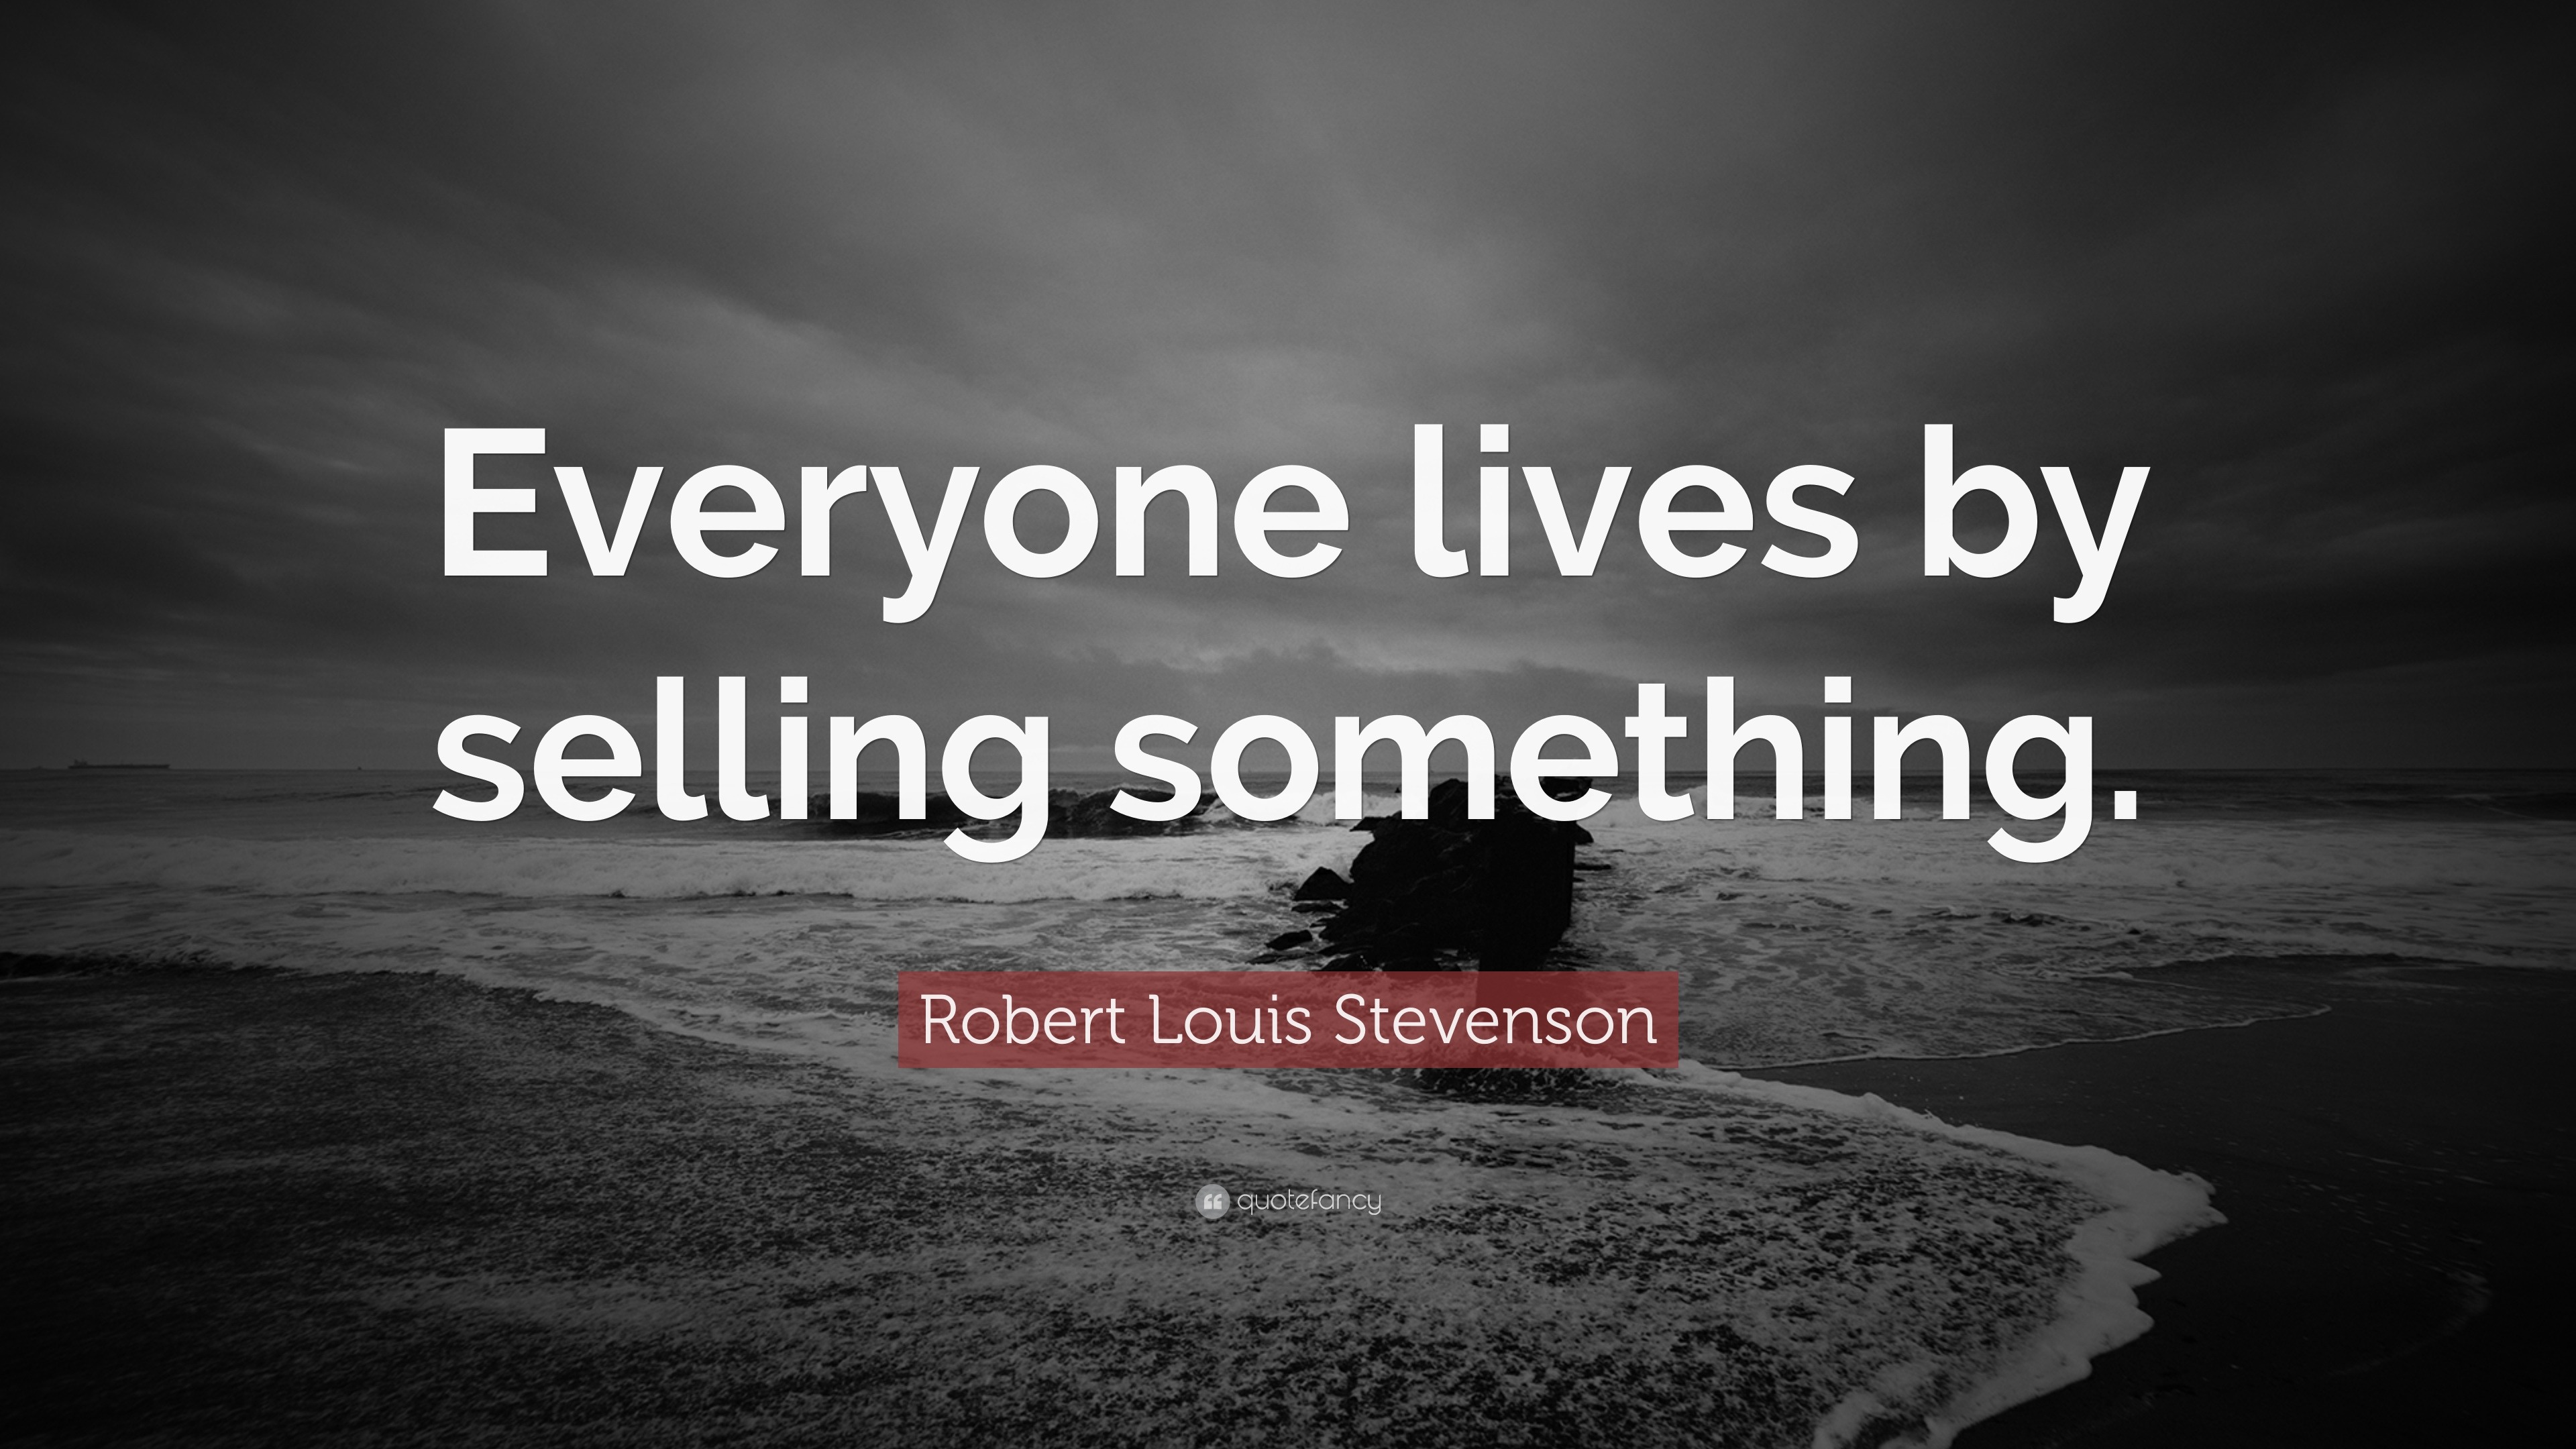 Robert Louis Stevenson Quote Everyone lives by selling 